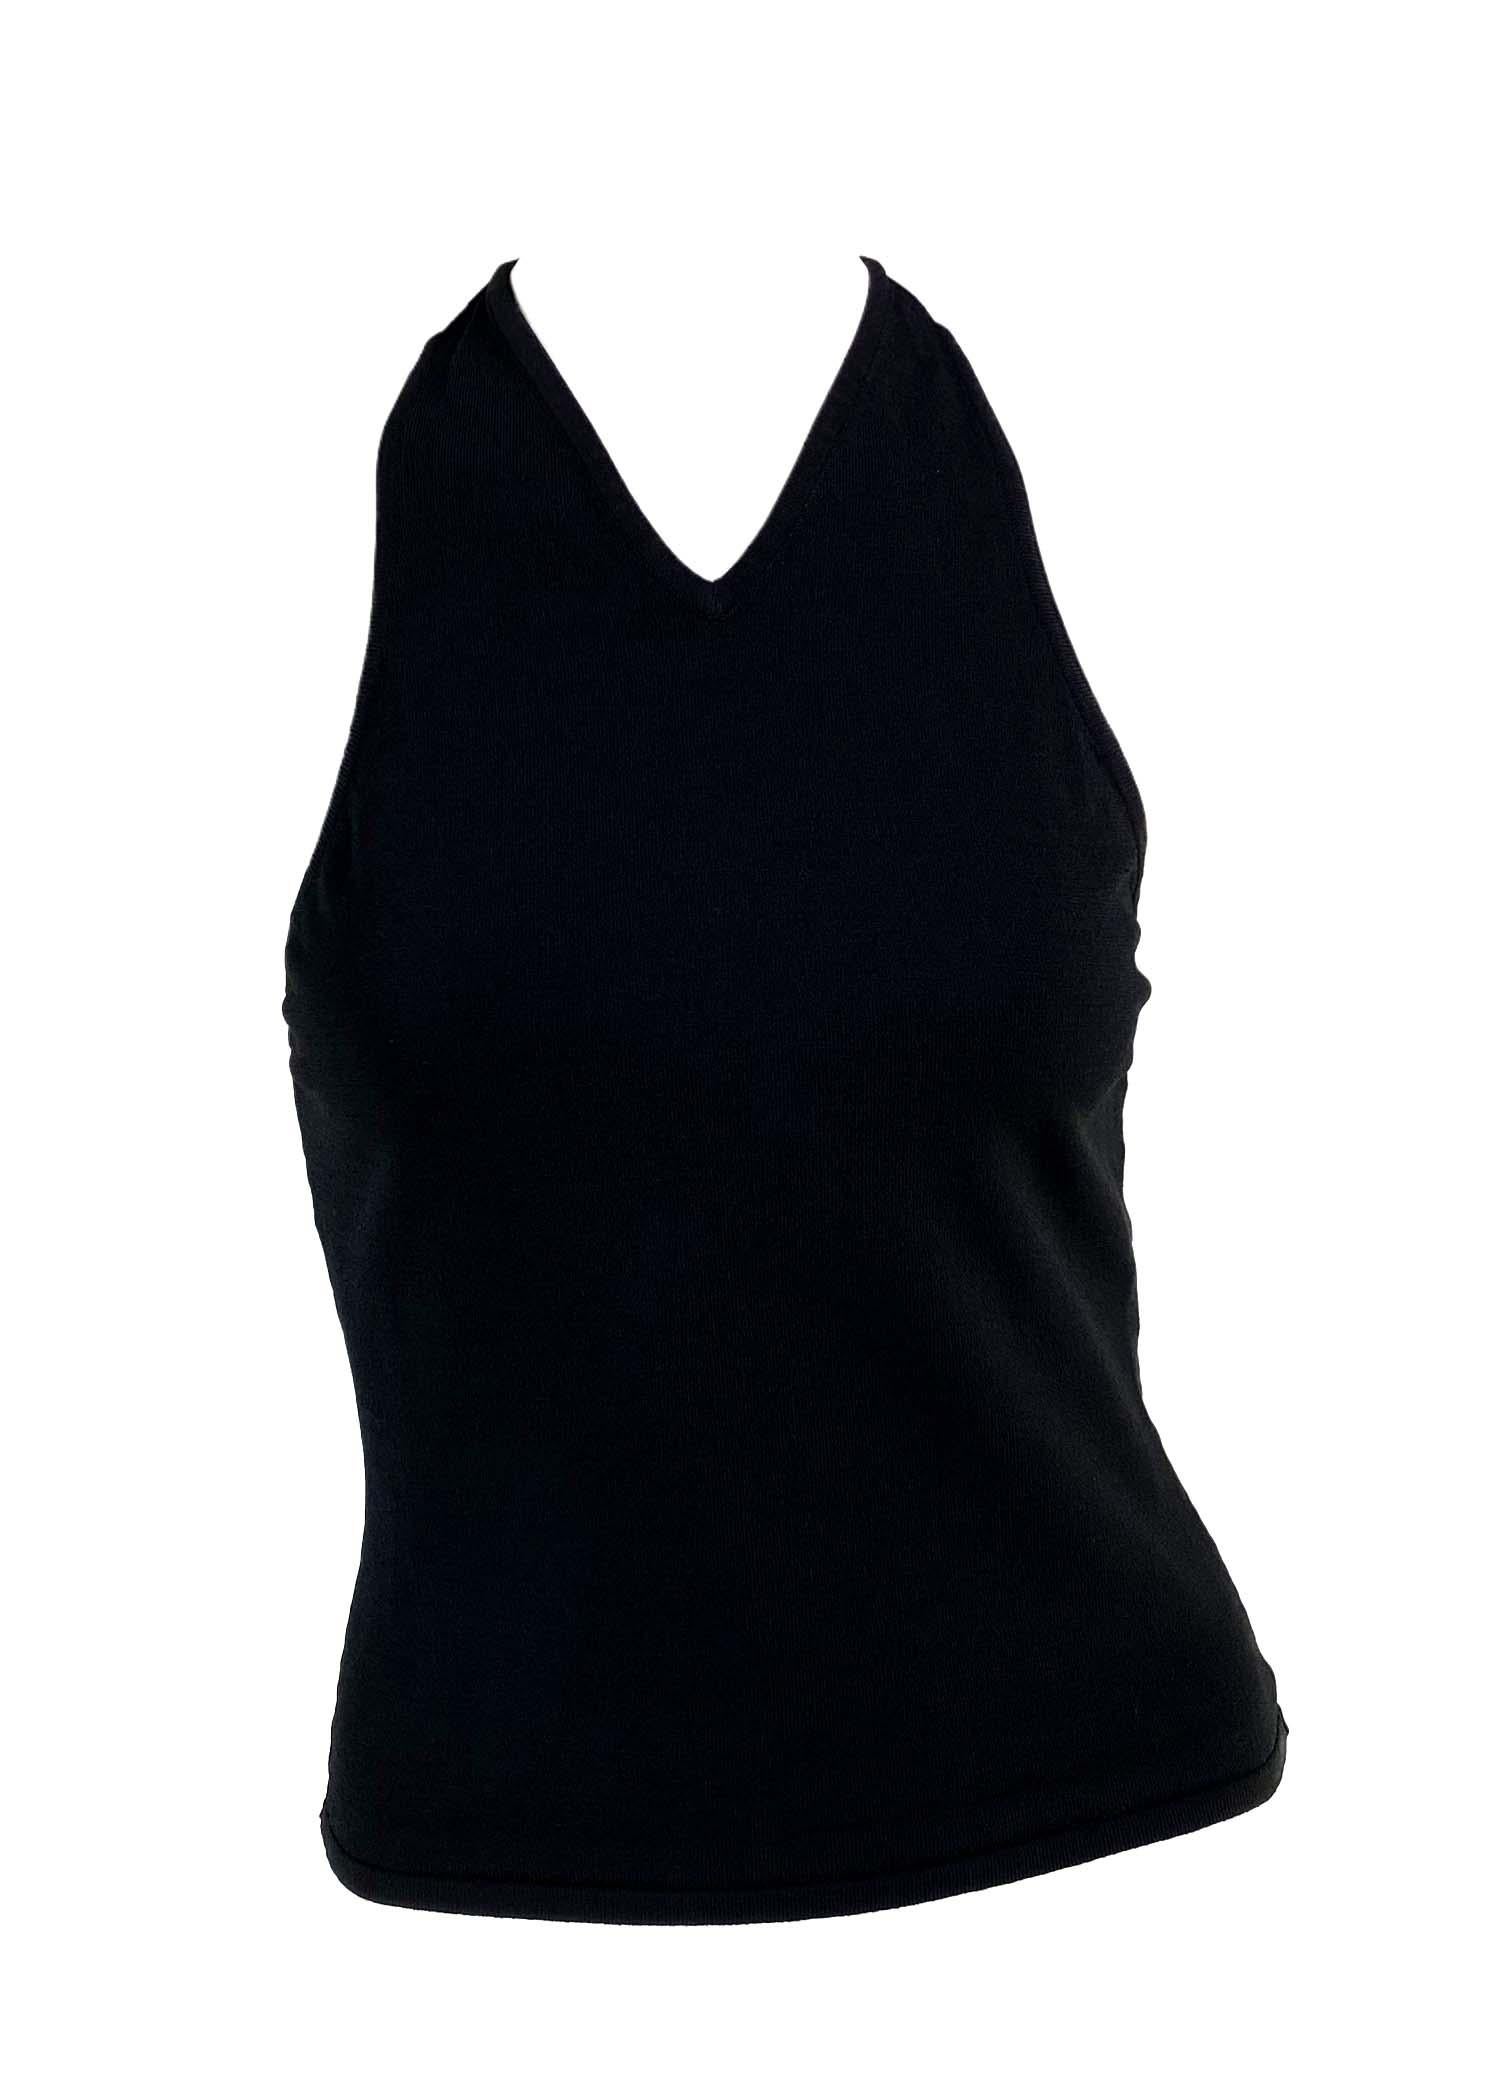 S/S 1998 Gucci by Tom Ford Black Knit Racerback Tank  In Excellent Condition In West Hollywood, CA